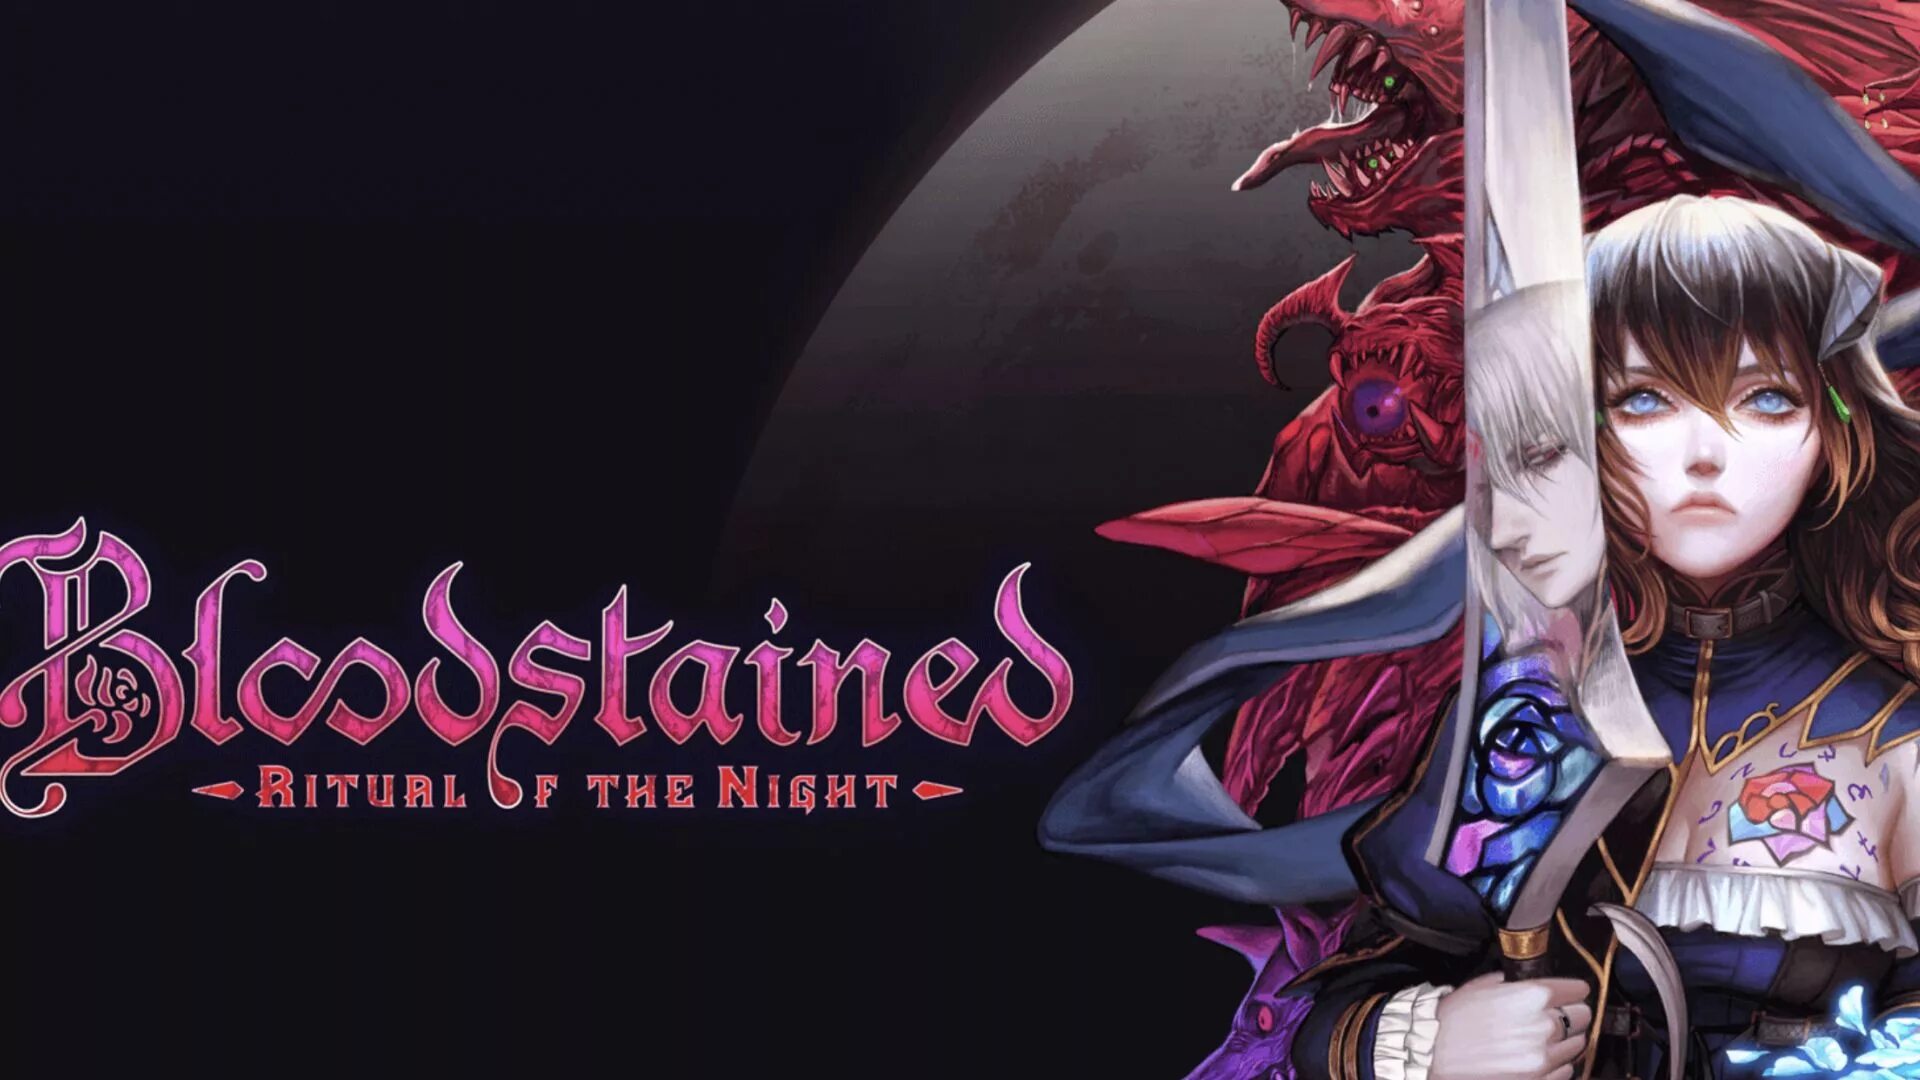 Bloodstained. Bloodstained: Ritual of the Night. Bloodstained Ritual of the Night парикмахер. Bloodstained фон. The bloodstained sack